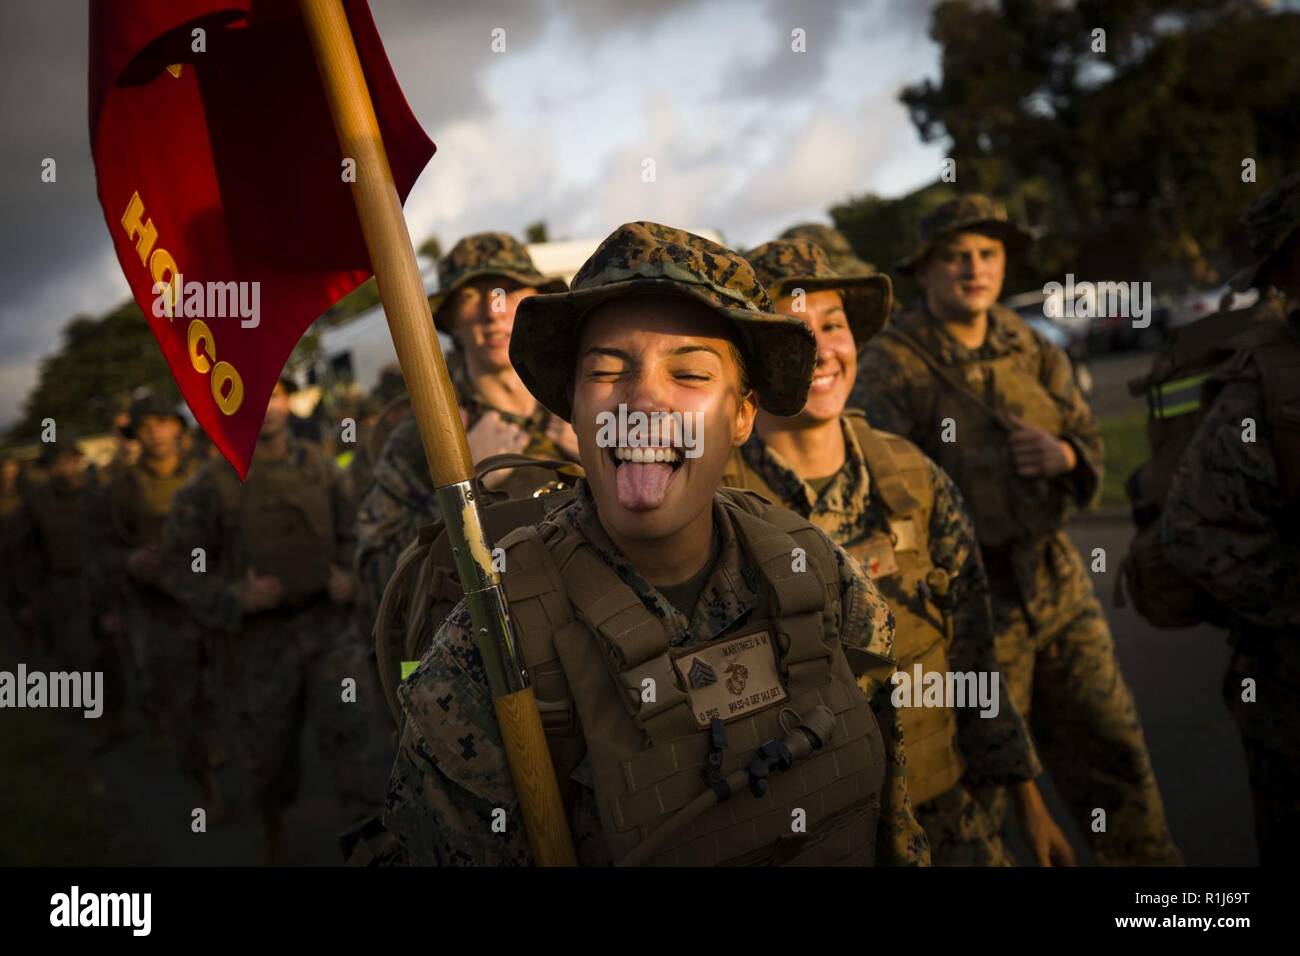 U.S. Marines Corps Sgt. Alexandria M. Aglio, a career planner, Headquarters Battalion, Marine Corps Base Hawaii (MCBH), displays enthusiasm during the battalion hike, MCBH, Oct. 5, 2018. The purpose of the hike was to increase physical and mental stamina, build espirit de corps, and to bolster combat readiness. Stock Photo